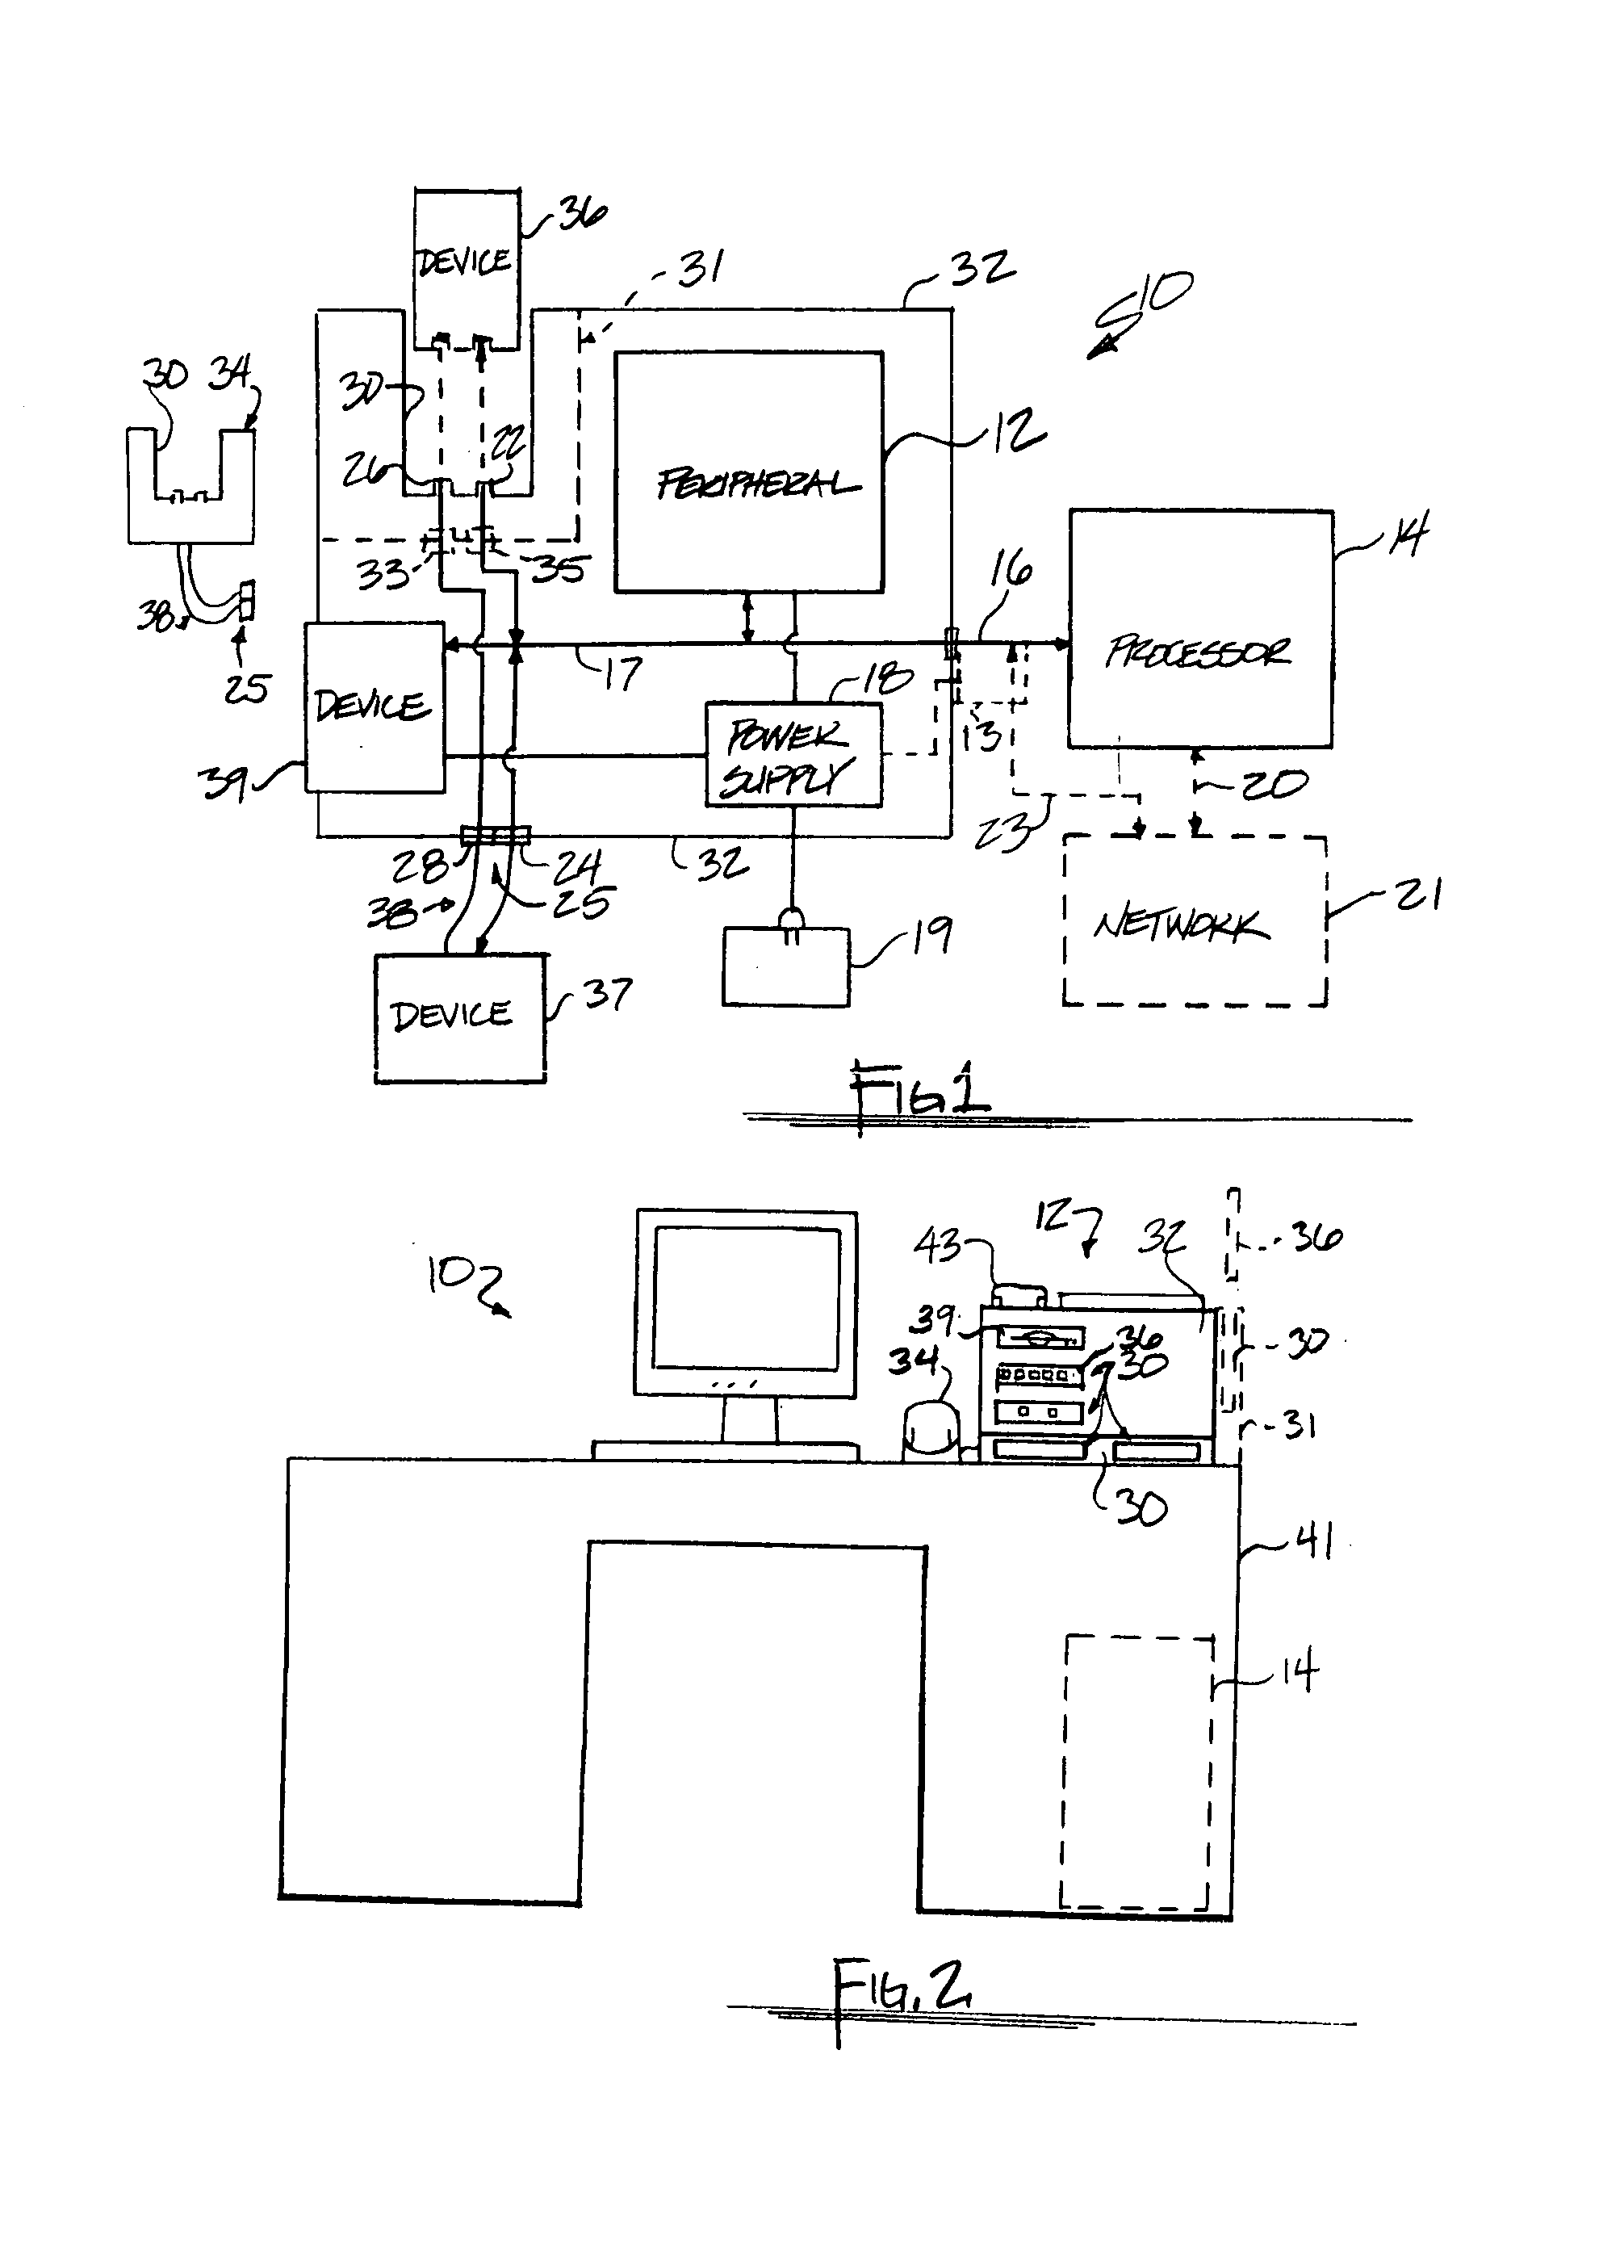 Embedded electronic device connectivity system